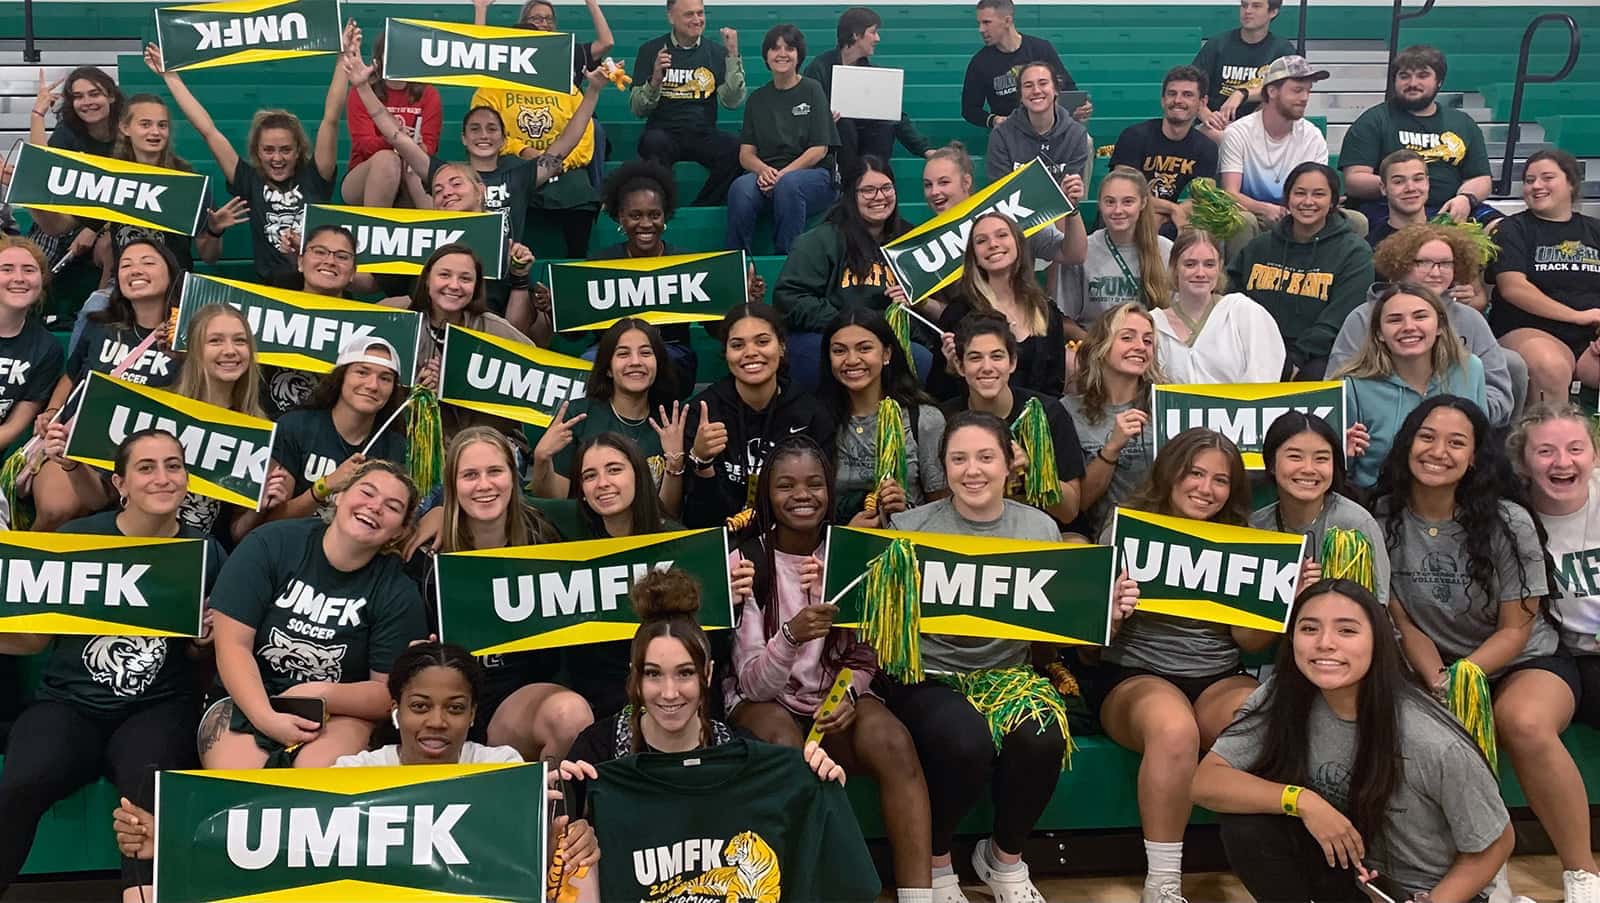 UMFK photo with students holding UMFK swag at the Sports Center